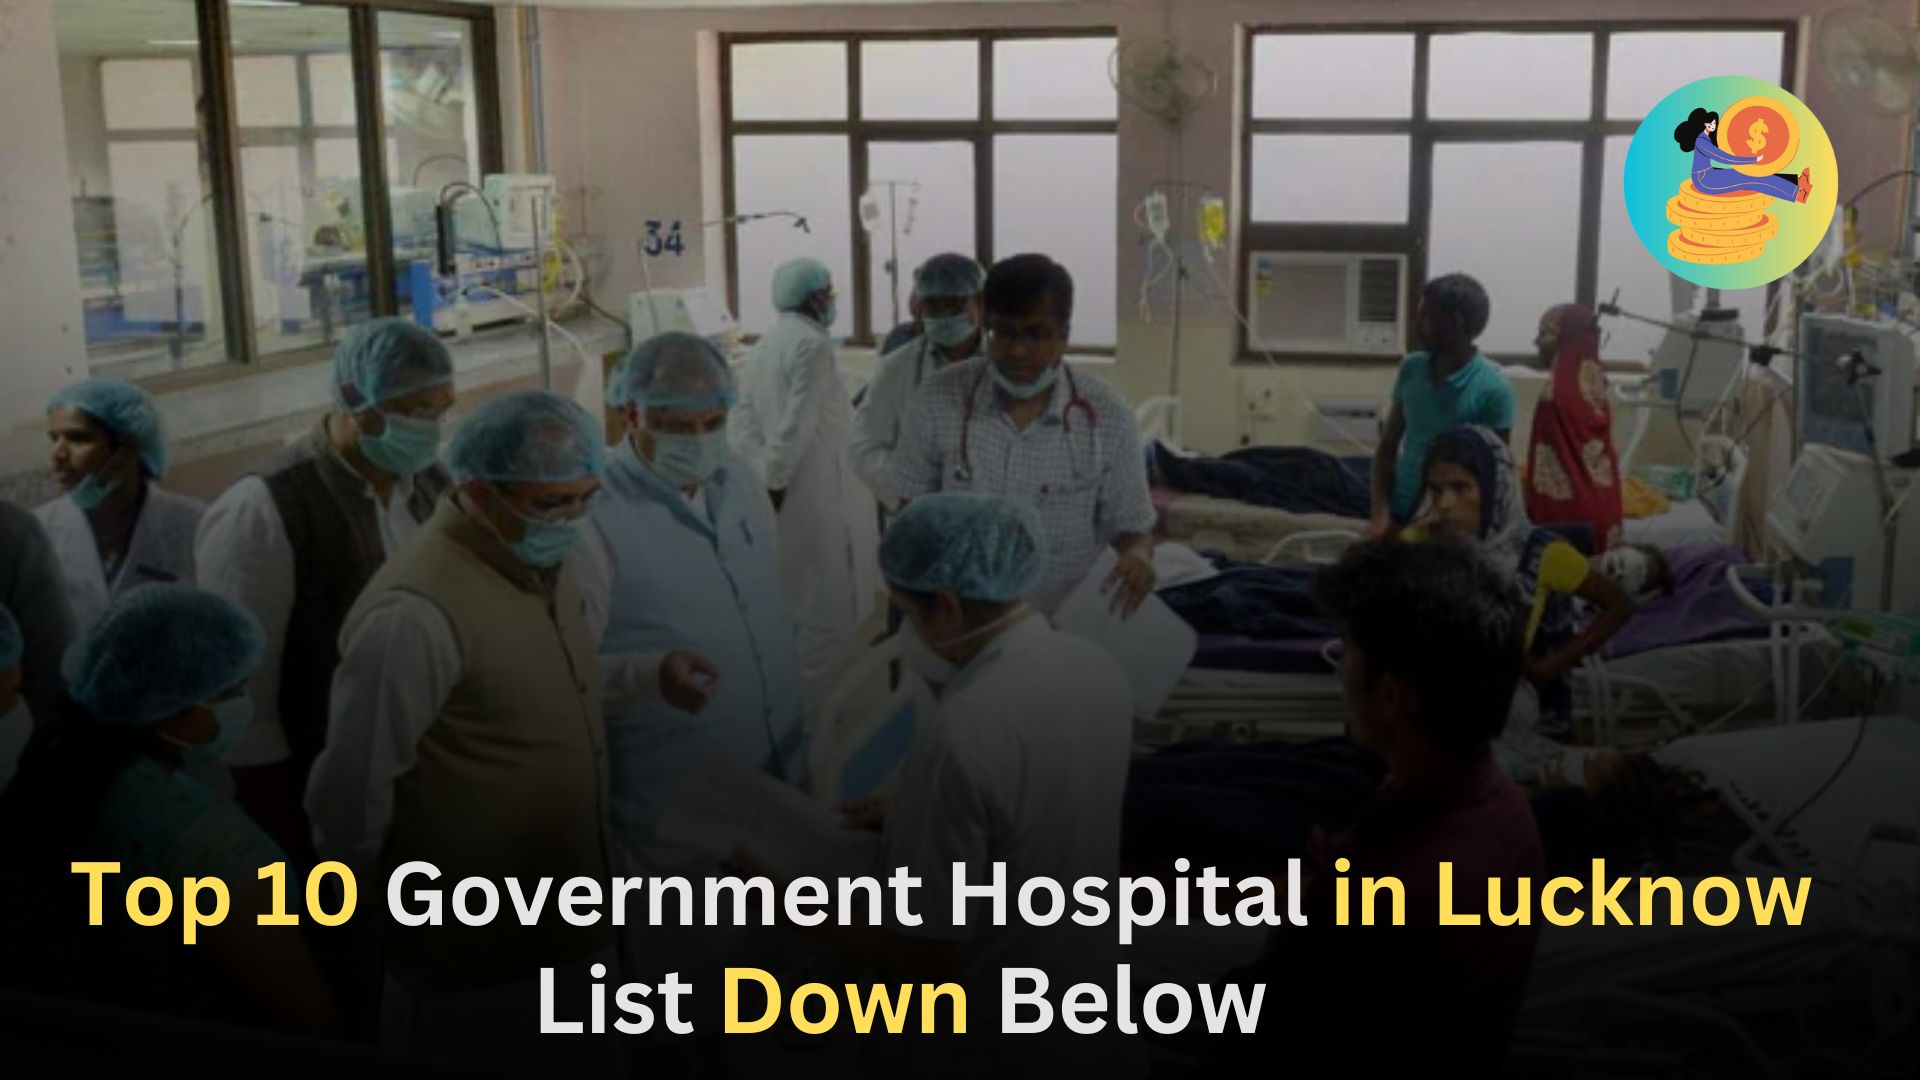 Top 10 Government Hospital in Lucknow, Best Features and services  (1)